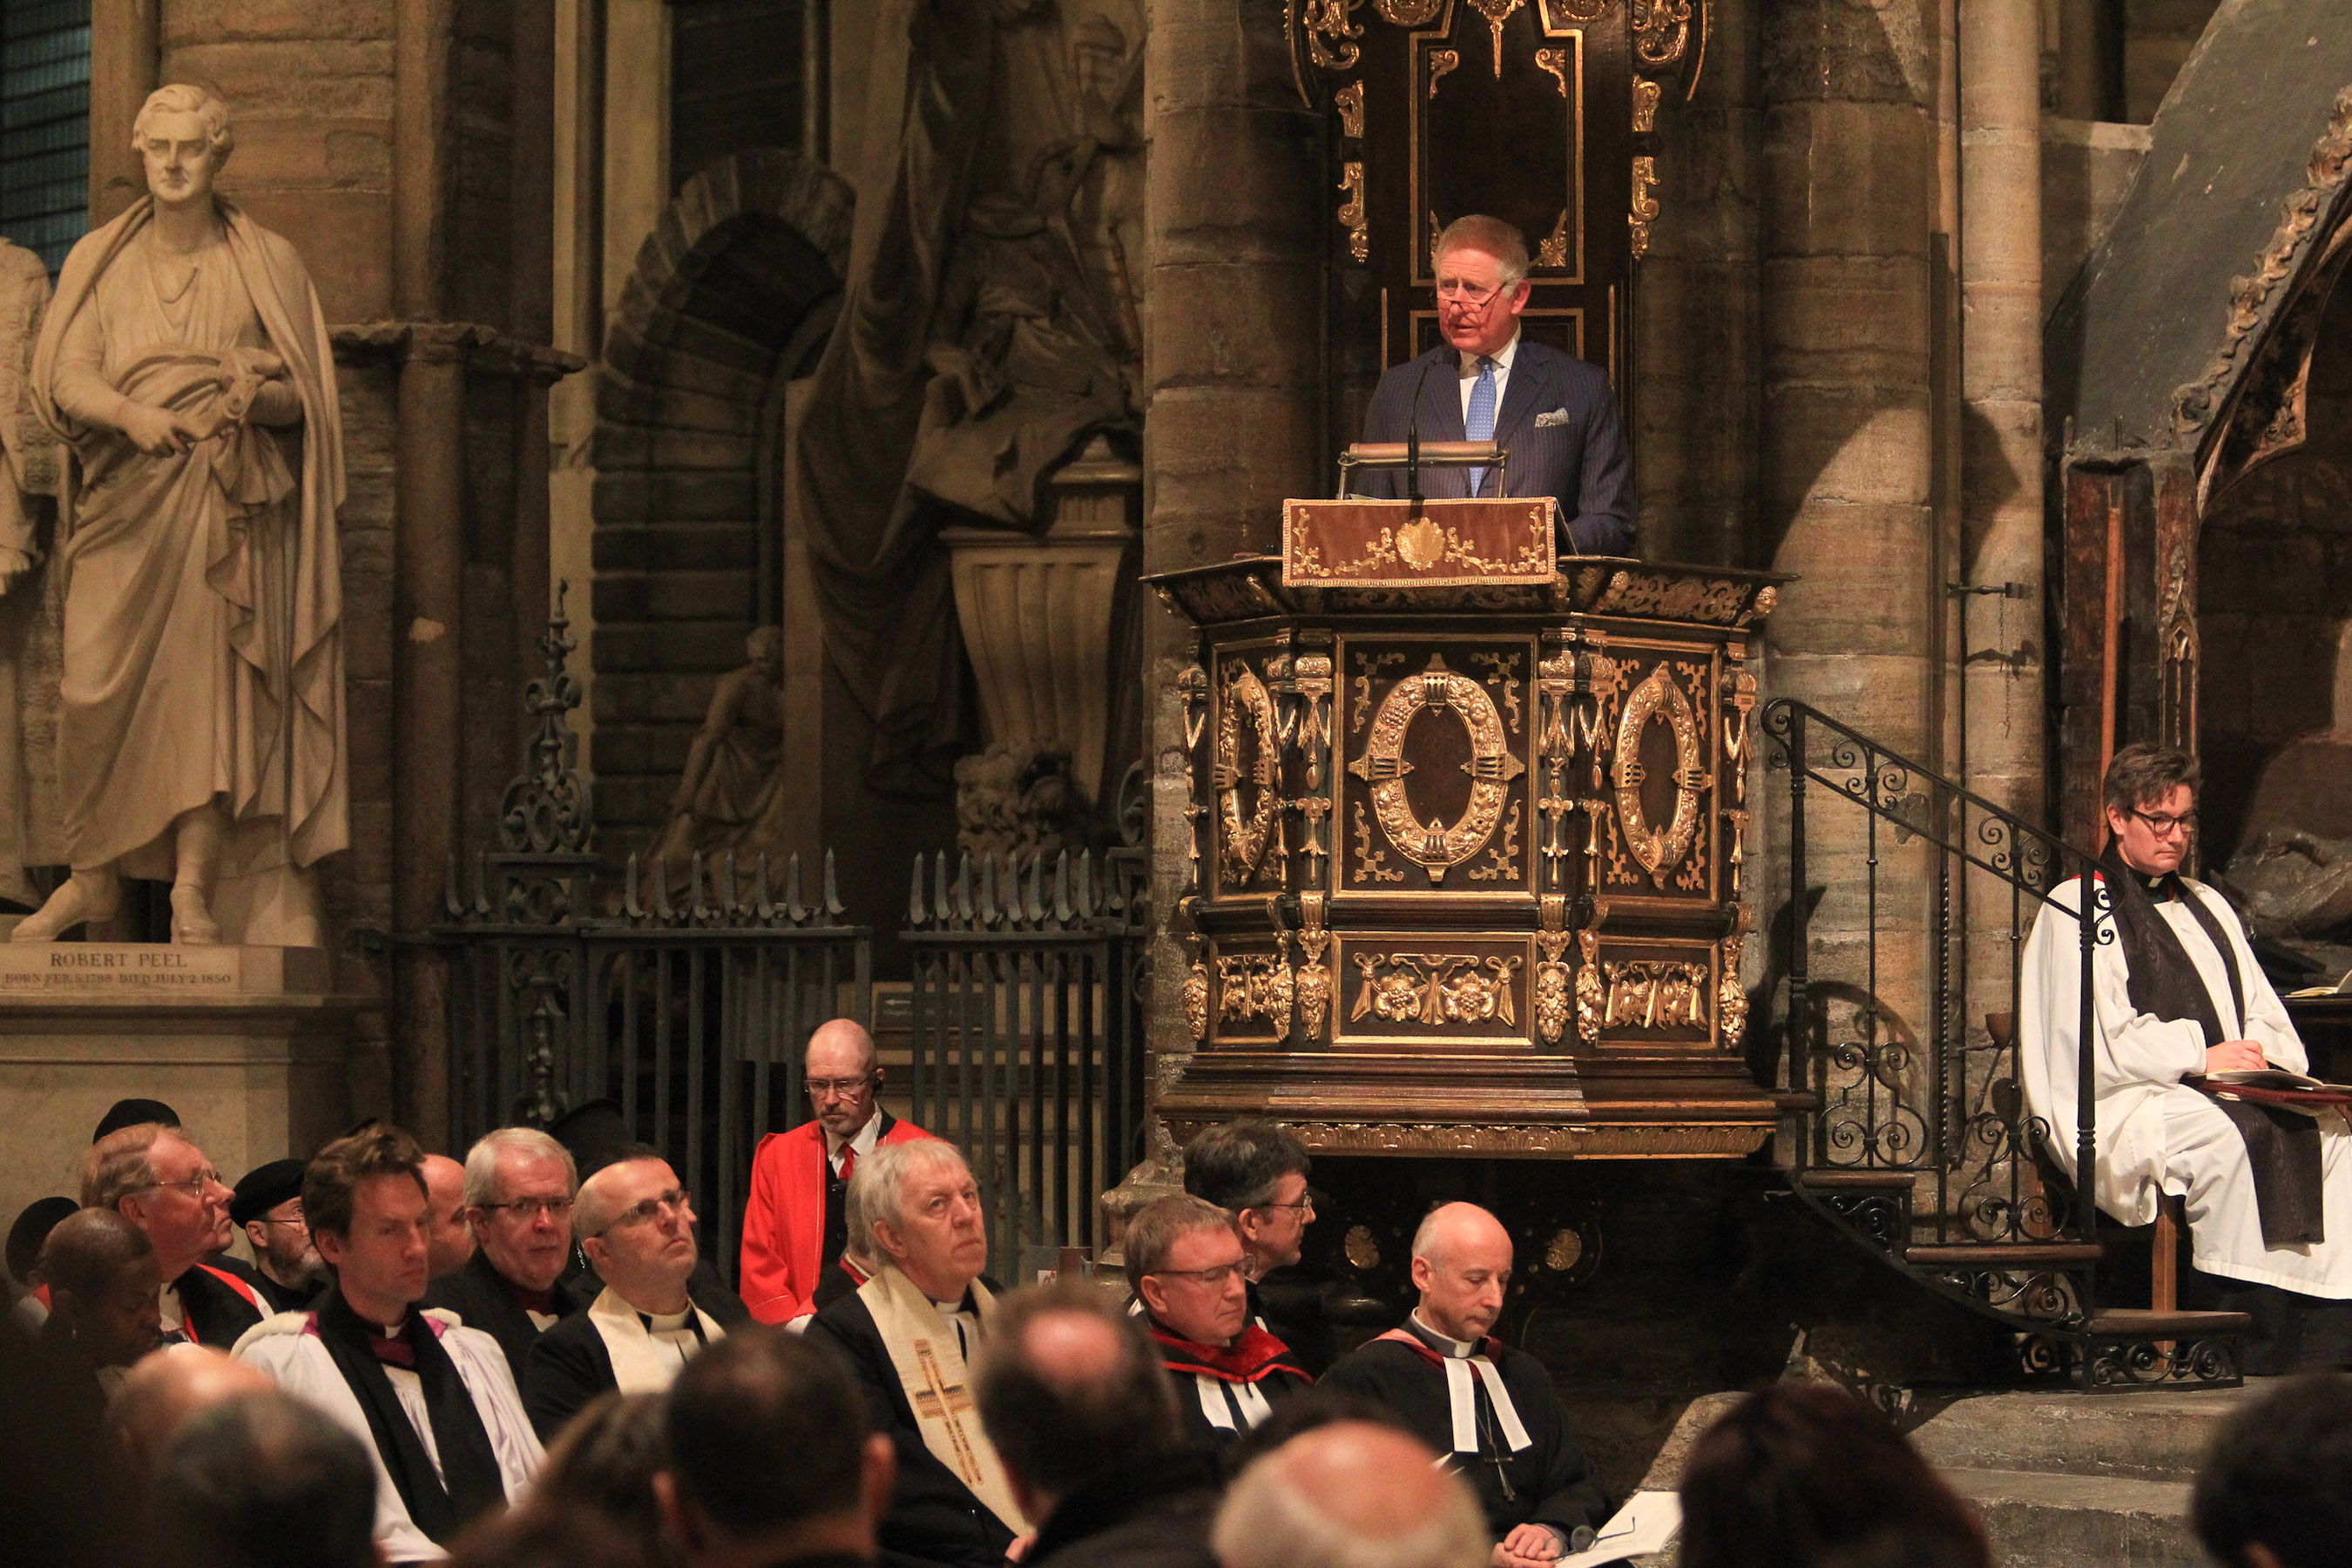 His Royal Highness The Prince of Wales, Prince Charles gives his Testimony ©Andrew Dunsmore/Westminster Abbey